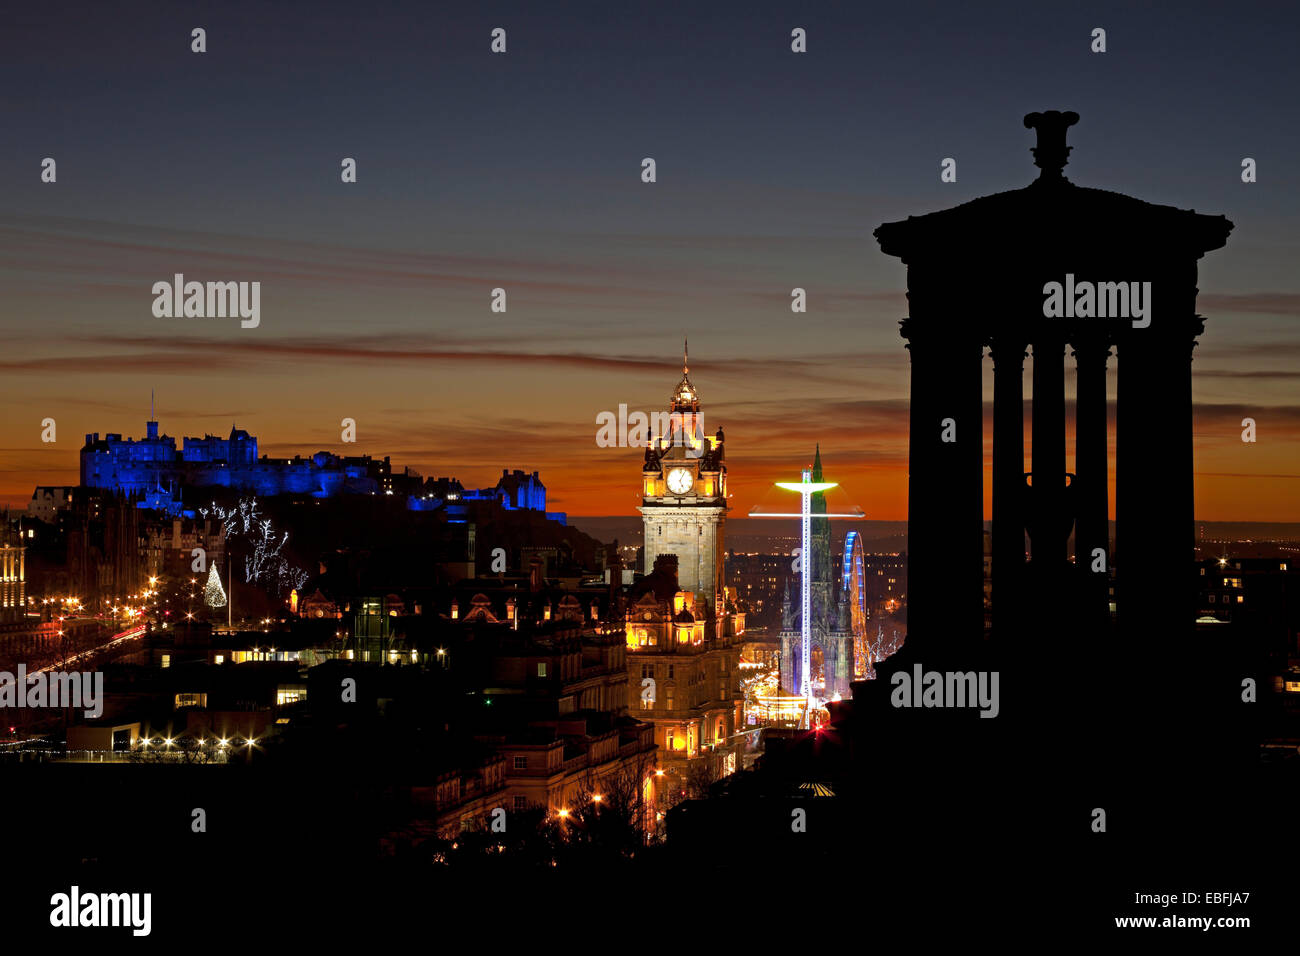 Edinburgh, Scotland, UK. 30th November, 2014. Edinburgh Castle and the city viewed from Calton Hill at sunset the castle is illuminated with blue lighting during St Andrew's Day celebrations, also showing the Big Wheel and Star Flyer rides situated beside the Scott Monument in Princes Street Gardens East. Stock Photo